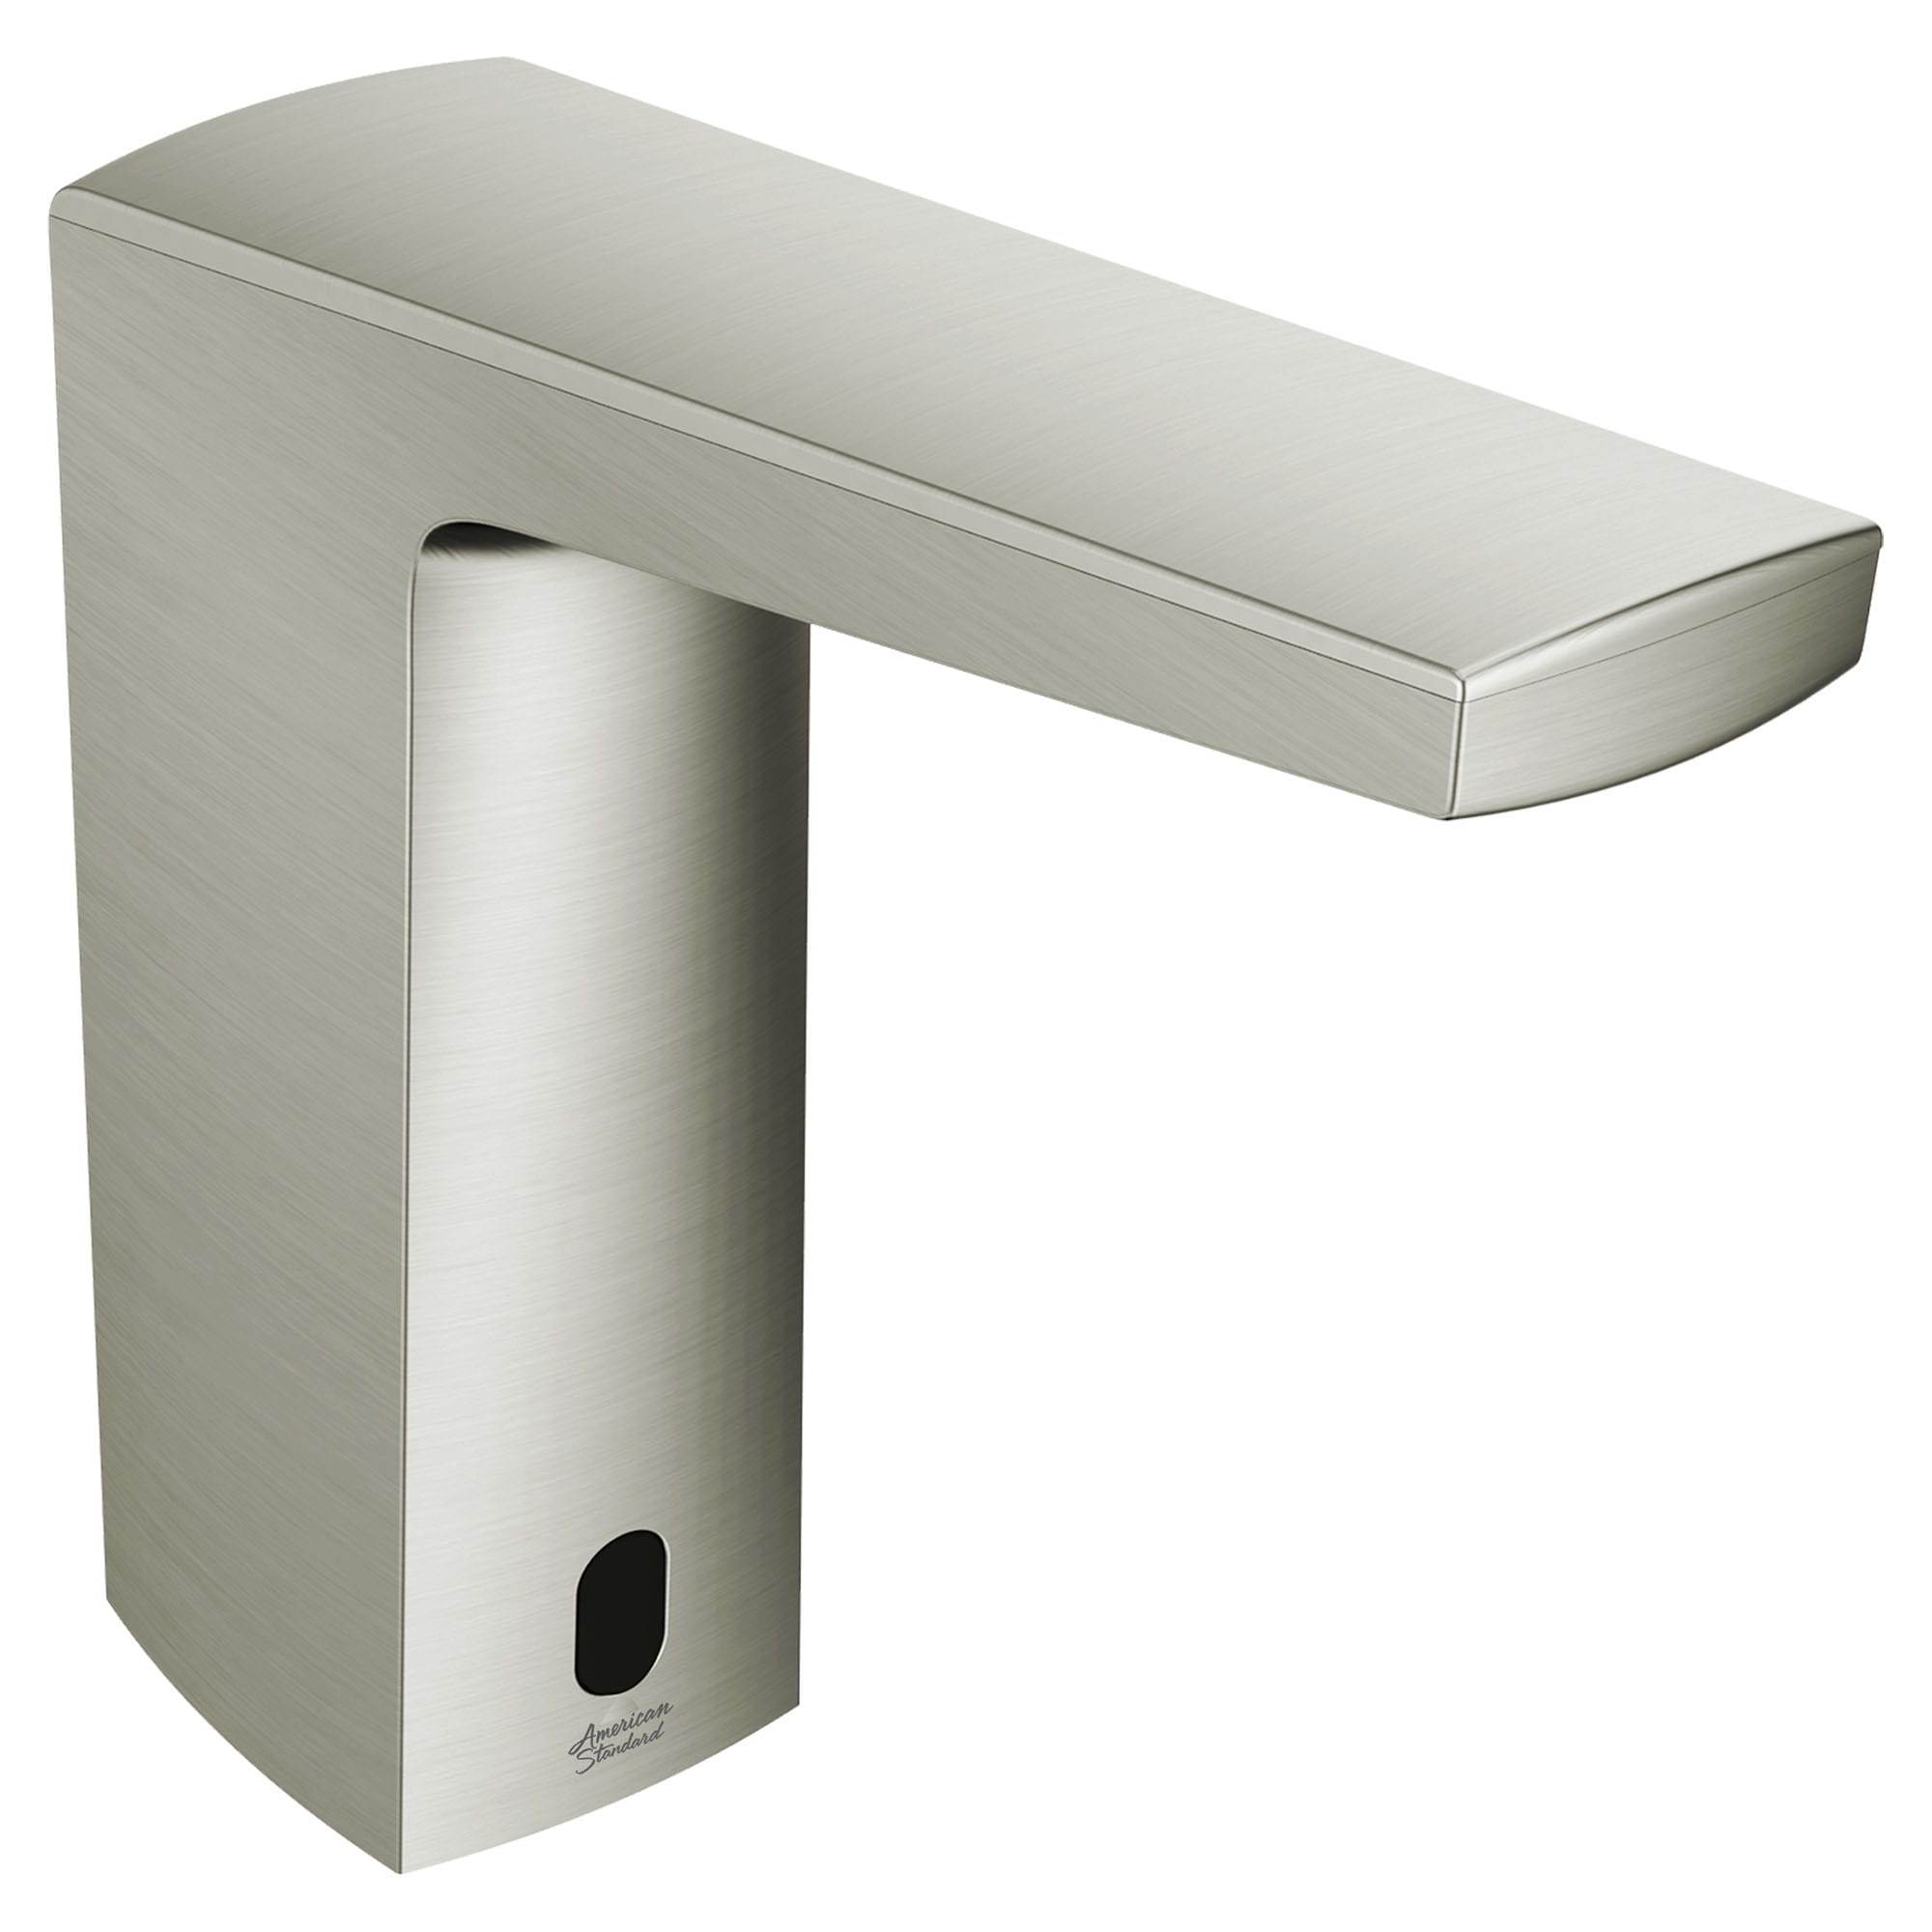 Paradigm Selectronic Touchless Faucet Battery Powered With Above Deck Mixing 05 gpm 19 Lpm   BRUSHED NICKEL